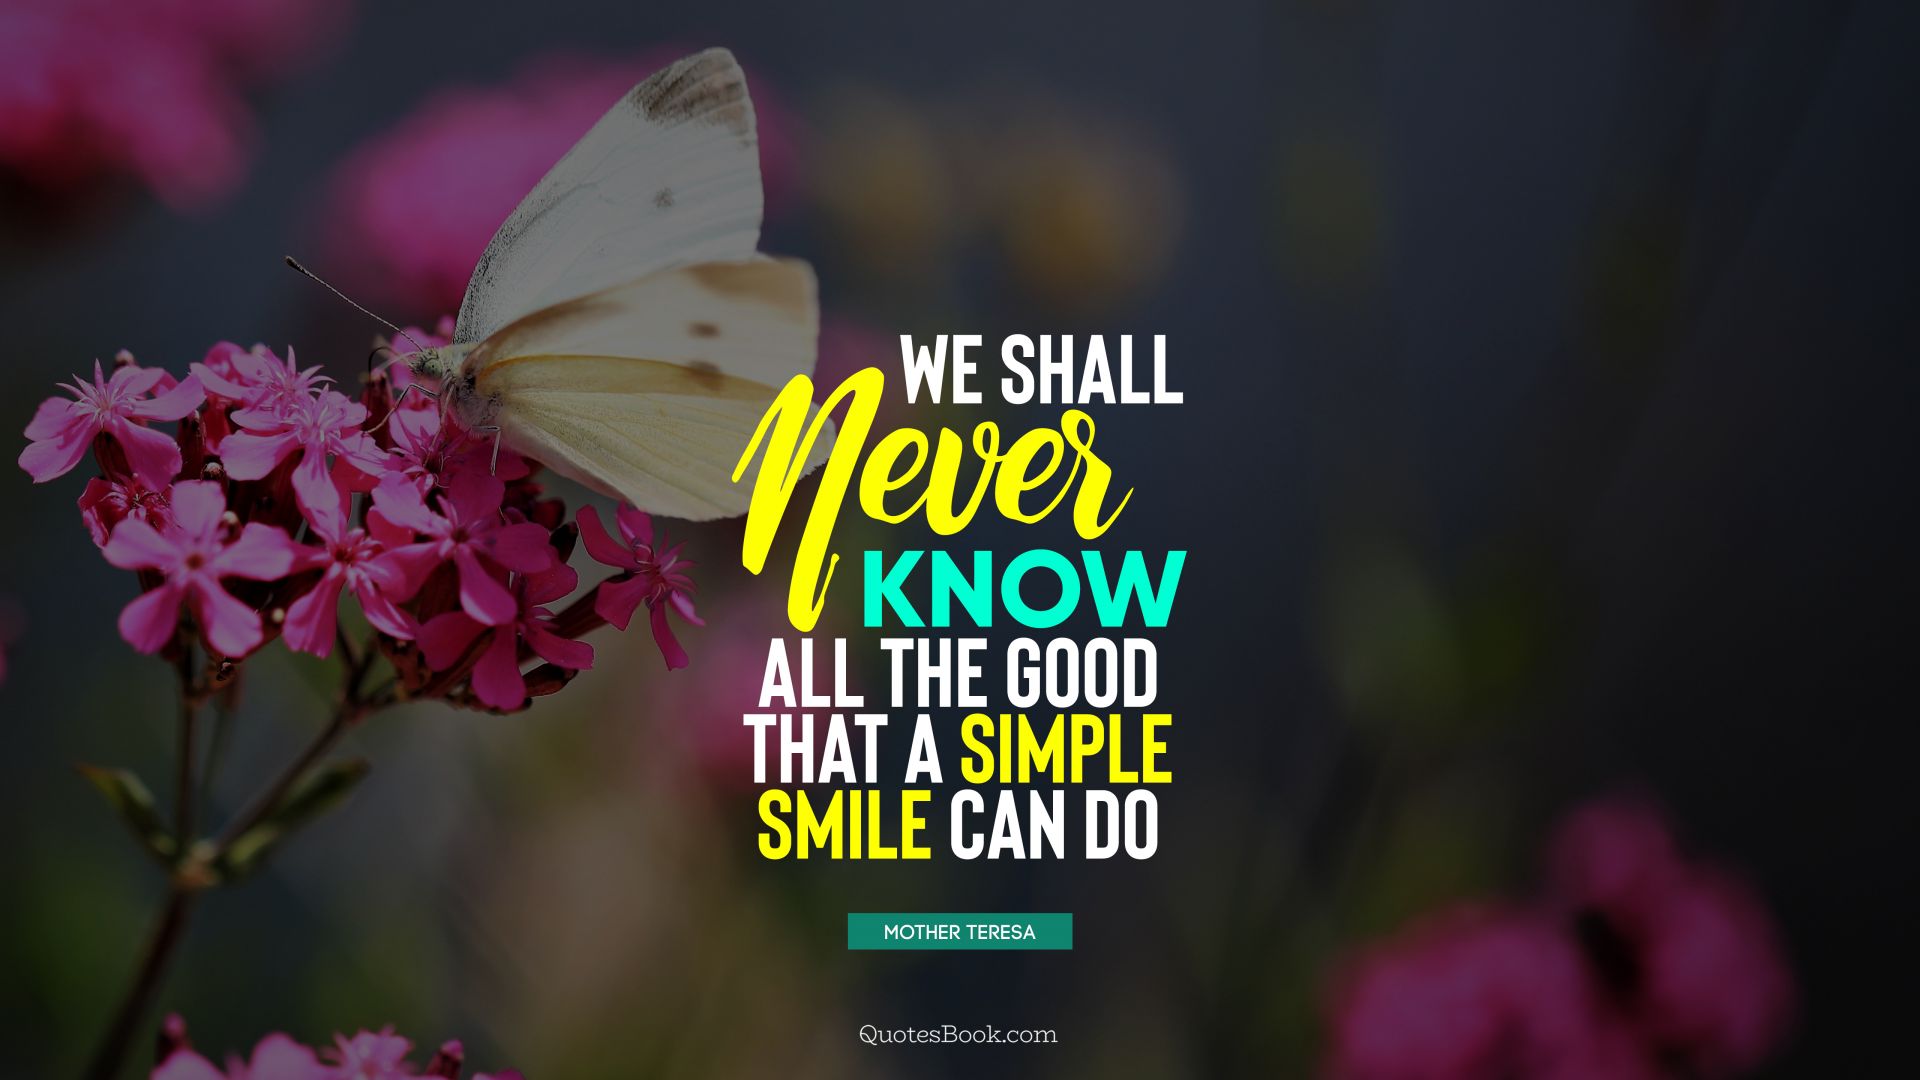 We shall never know all the good that a simple smile can do. - Quote by Mother Teresa